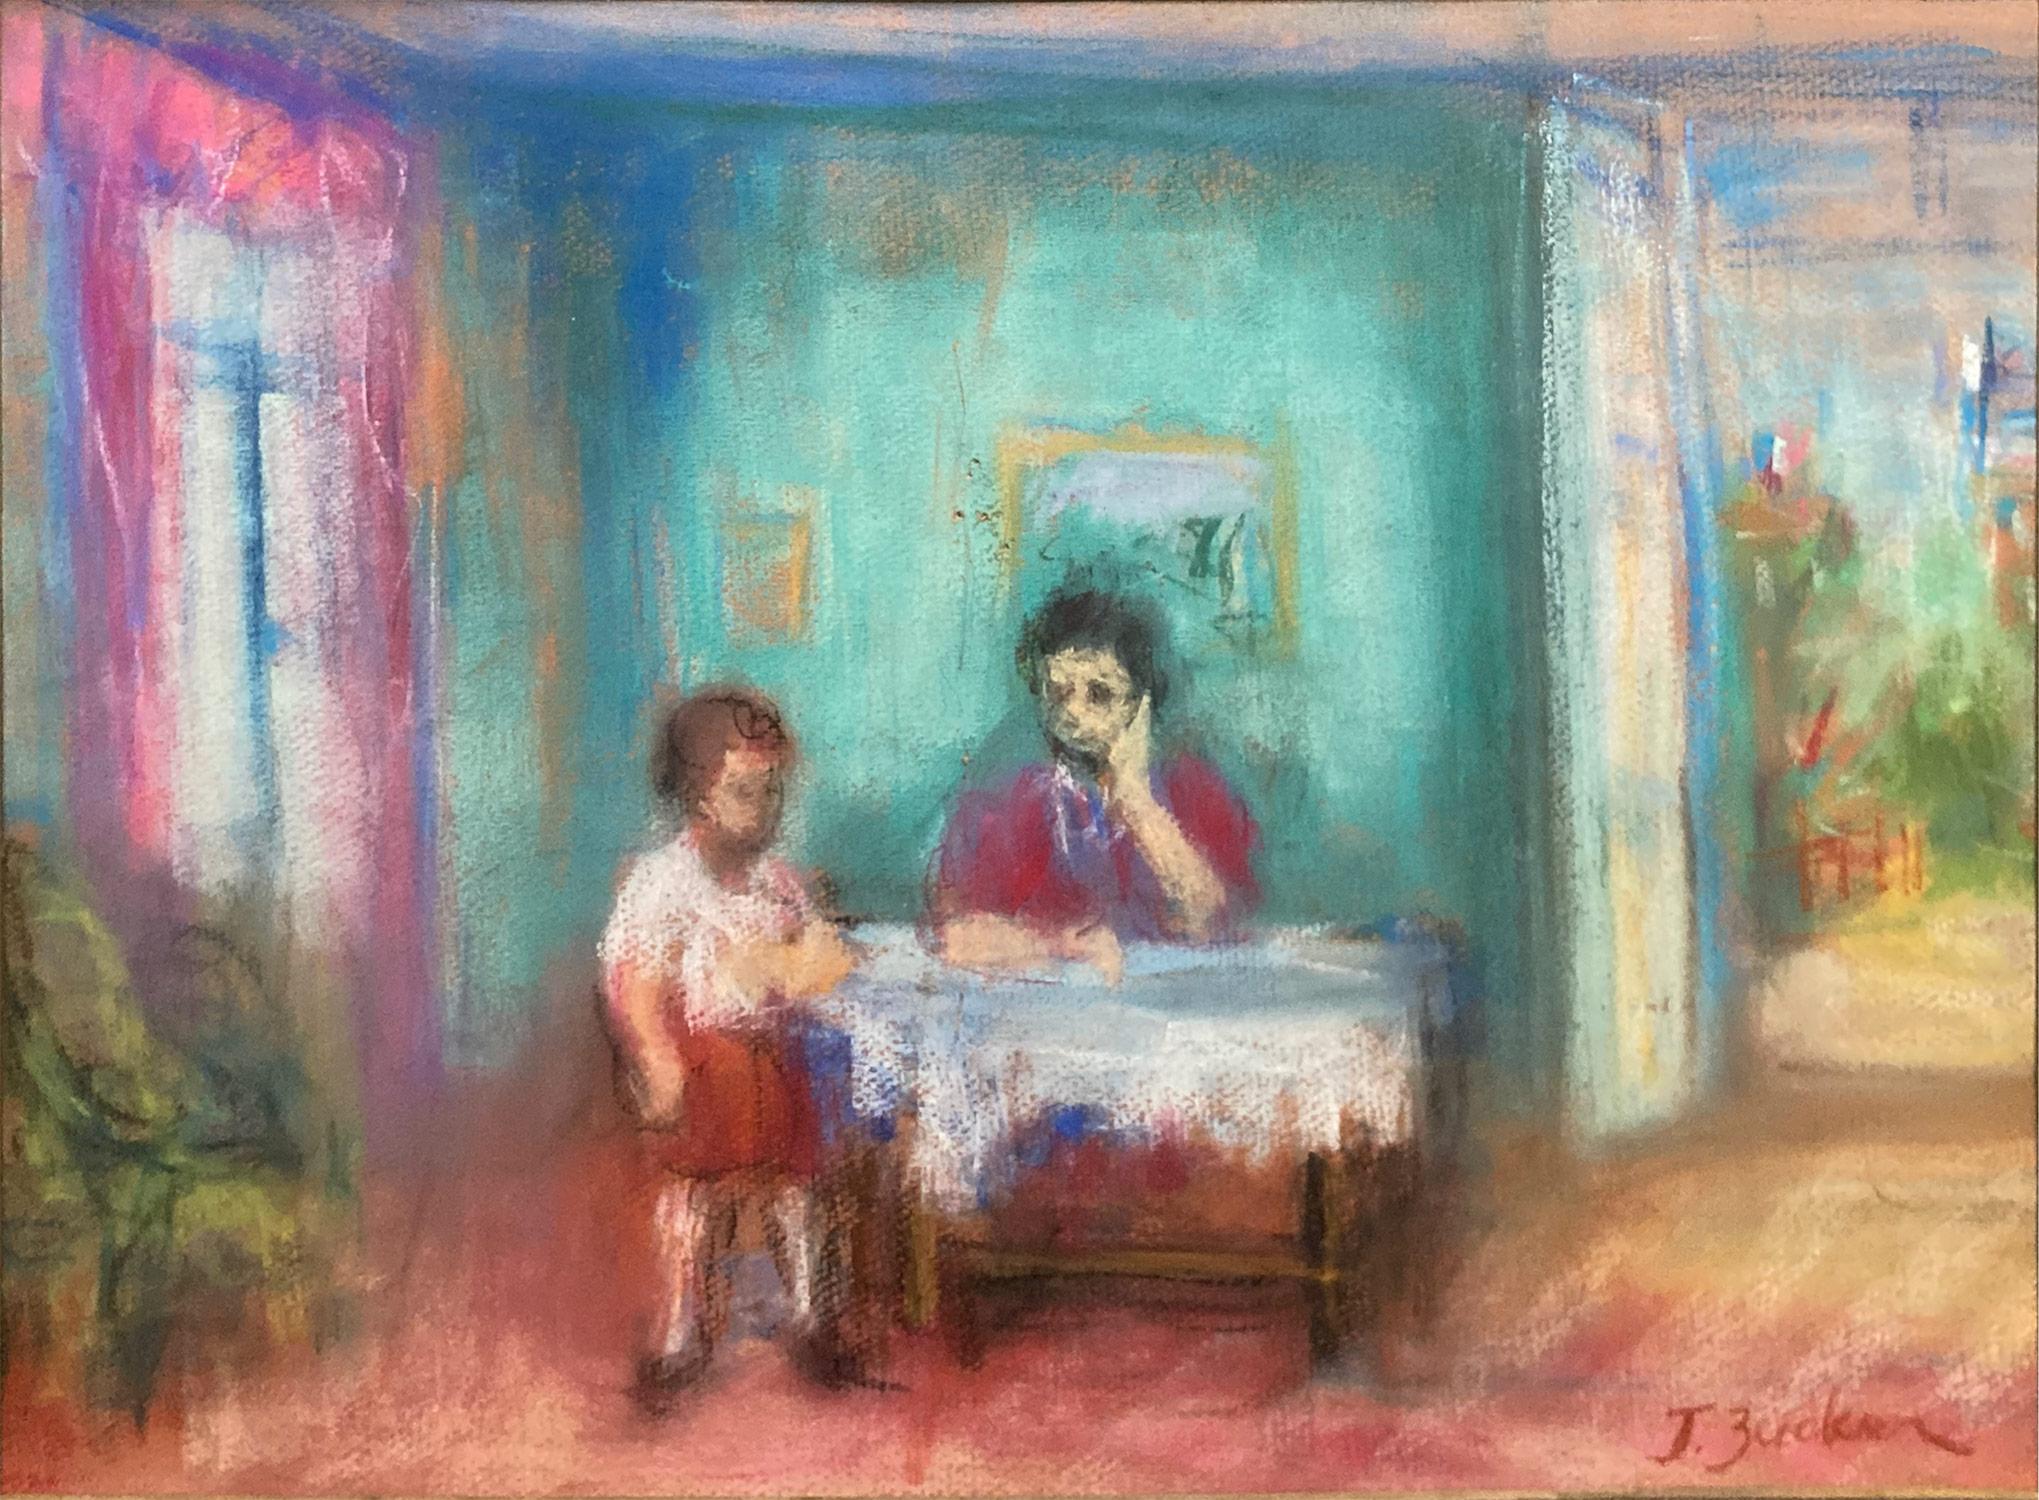 A whimsical interior scene depicting two figures in the living room with an older person and young boy, perhaps Father and son with a door open into the background which shows Parisian streets with a flag of France. The bright colors and quick brush